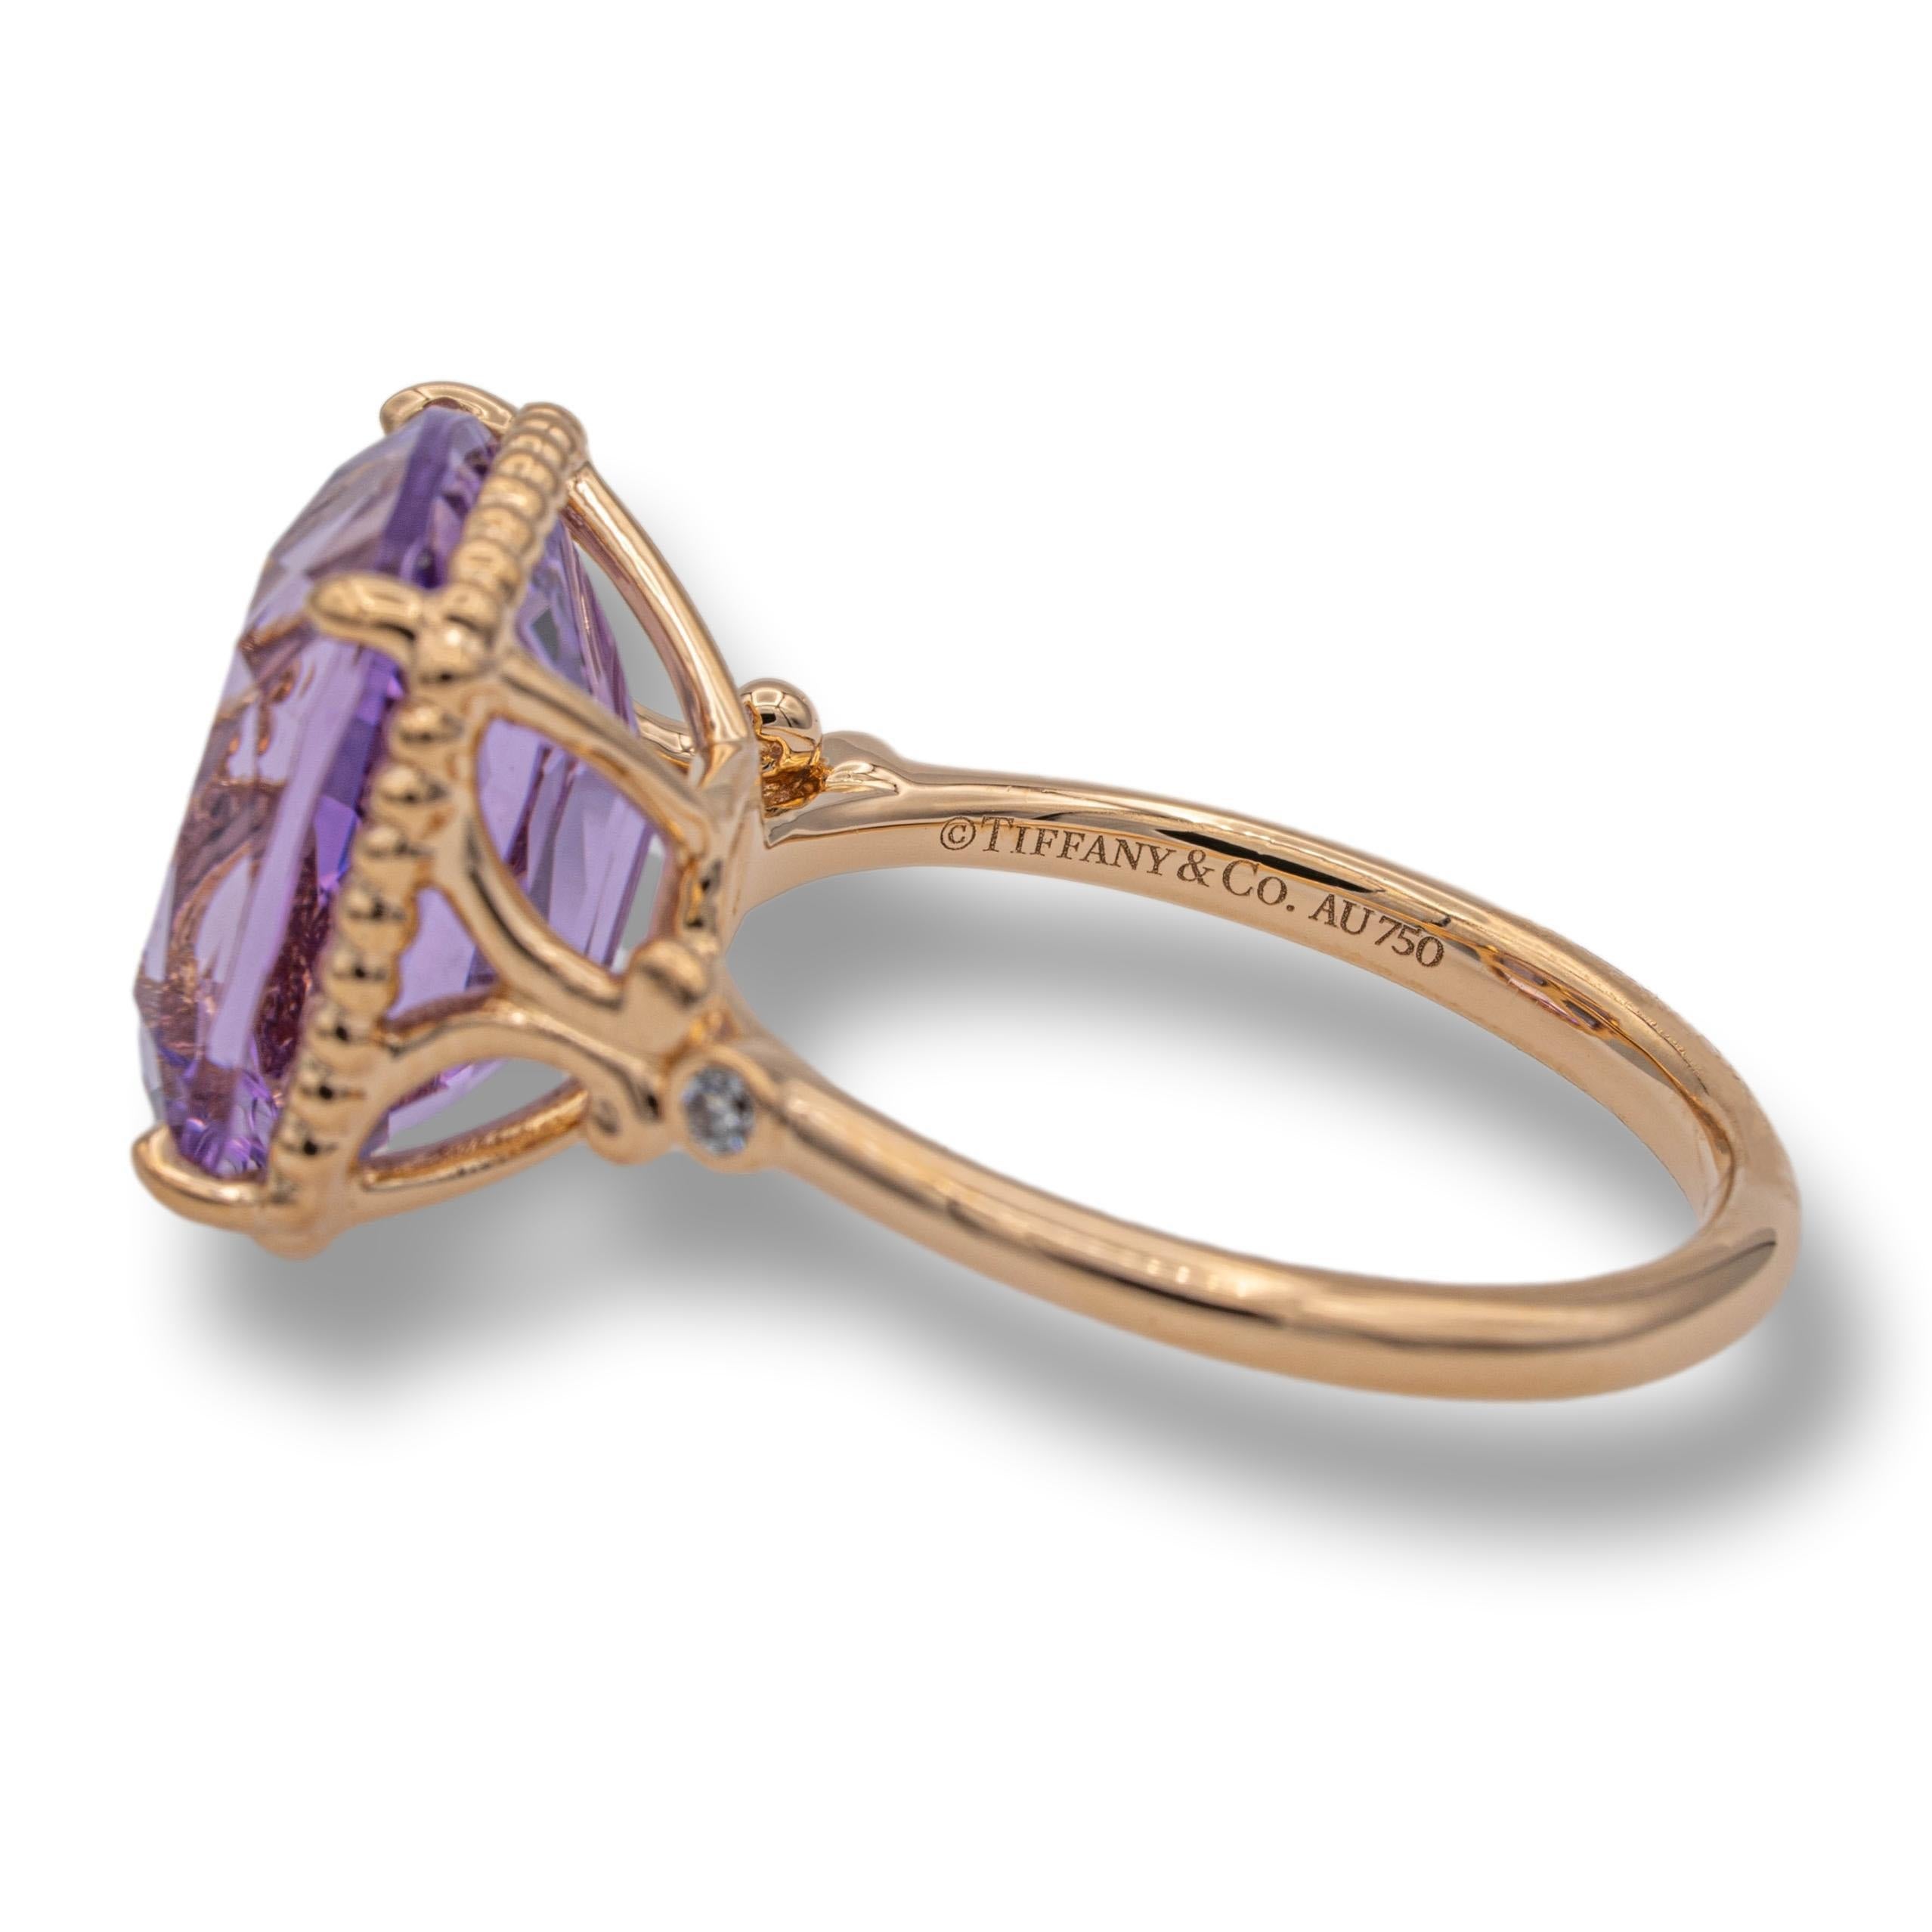 Tiffany & Co. vintage cocktail ring finely crafted in 18 karat rose gold with a center cushion amethyst weighing 6 carats approximately flanked by 2 round brilliant cut diamonds on each side weighing 0.03 carats of diamonds.

Stamp: Tiffany & Co.